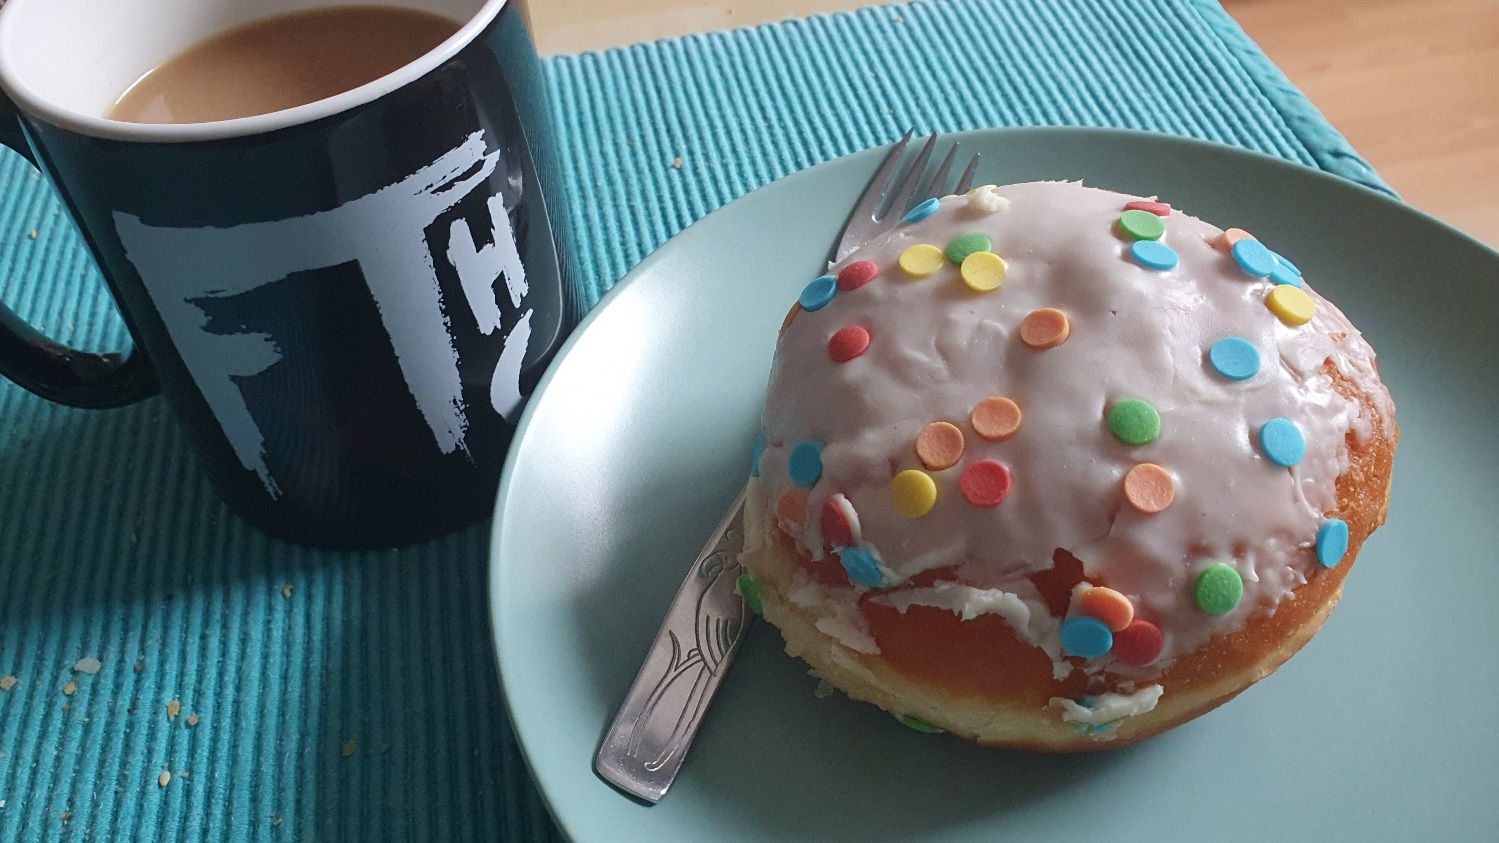 Black mug with FTHC (Album) logo, filled with coffee. Next is a Berliner (pastry) with sugar confetti icing on a green plate